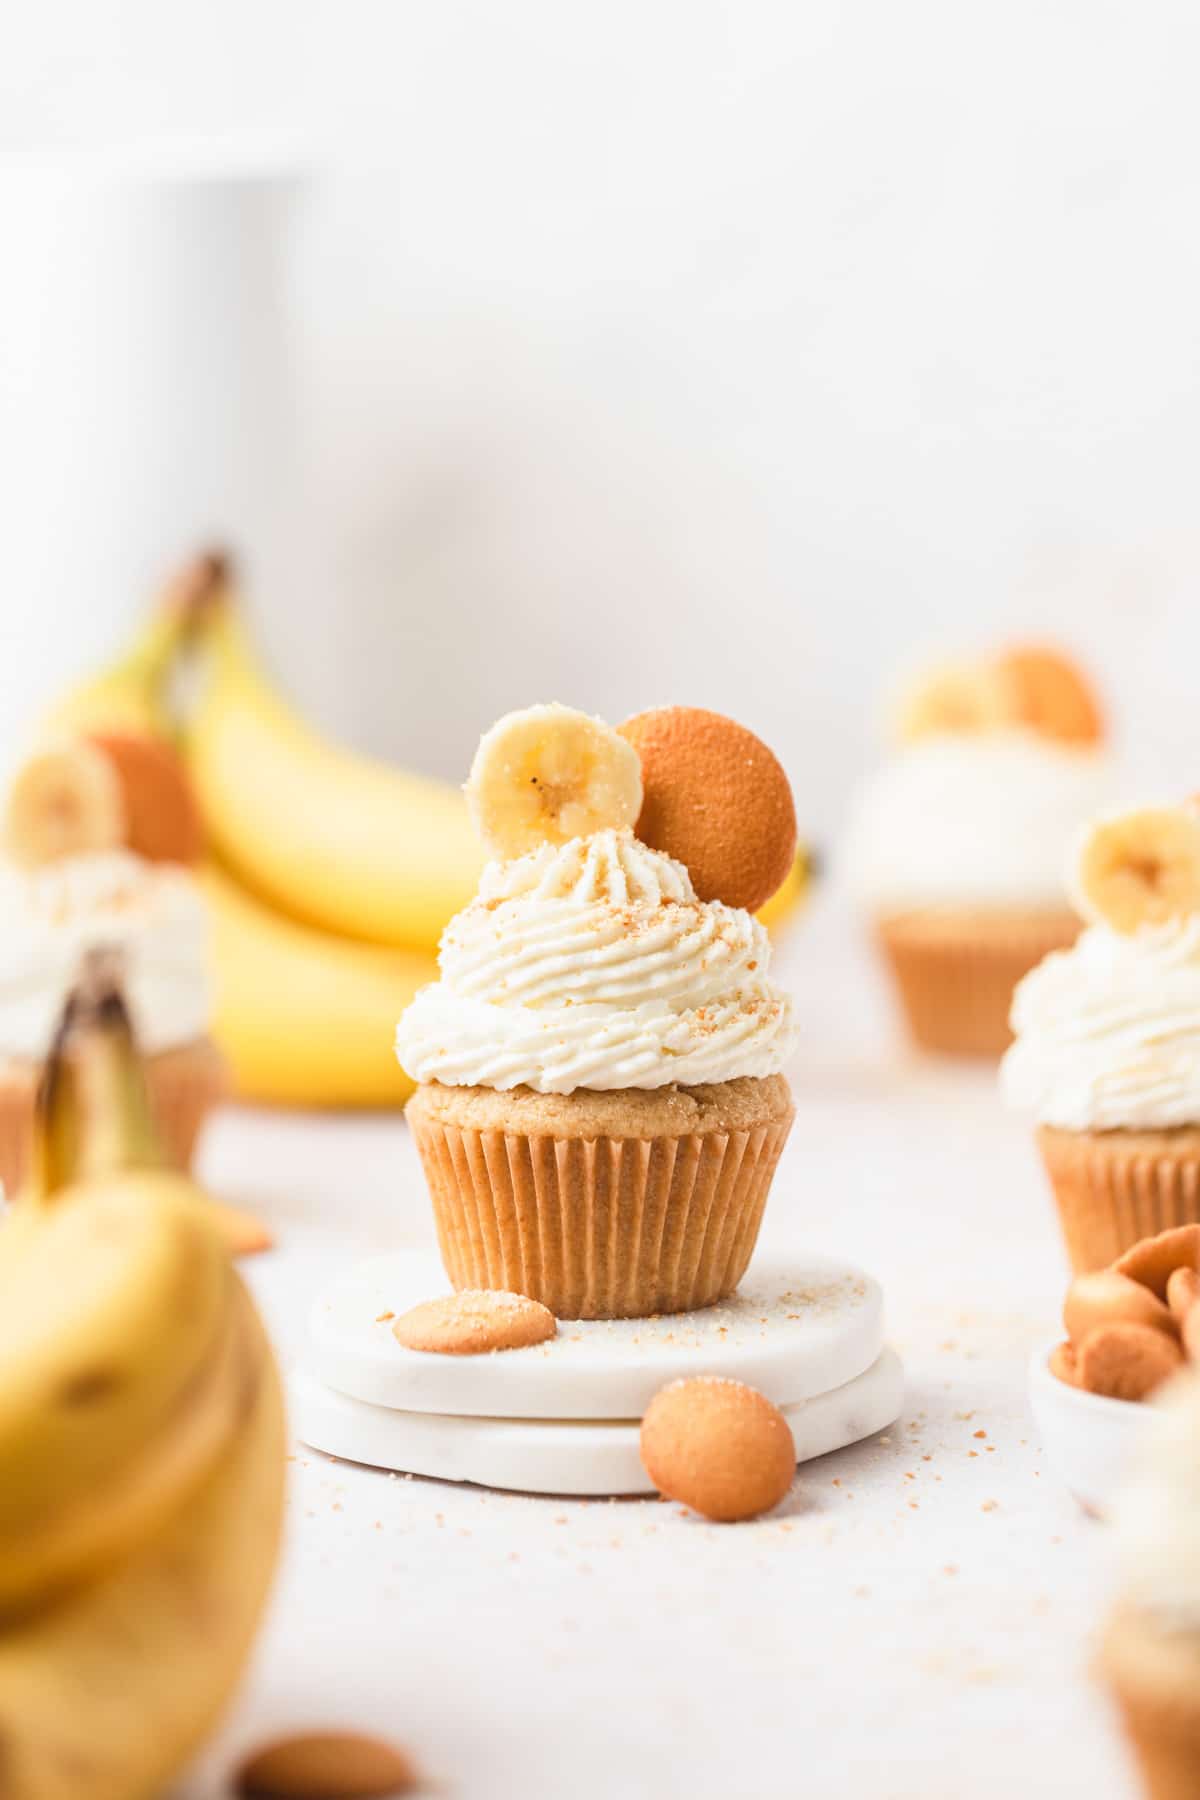 banana pudding cupcakes topped with nilla wafers.